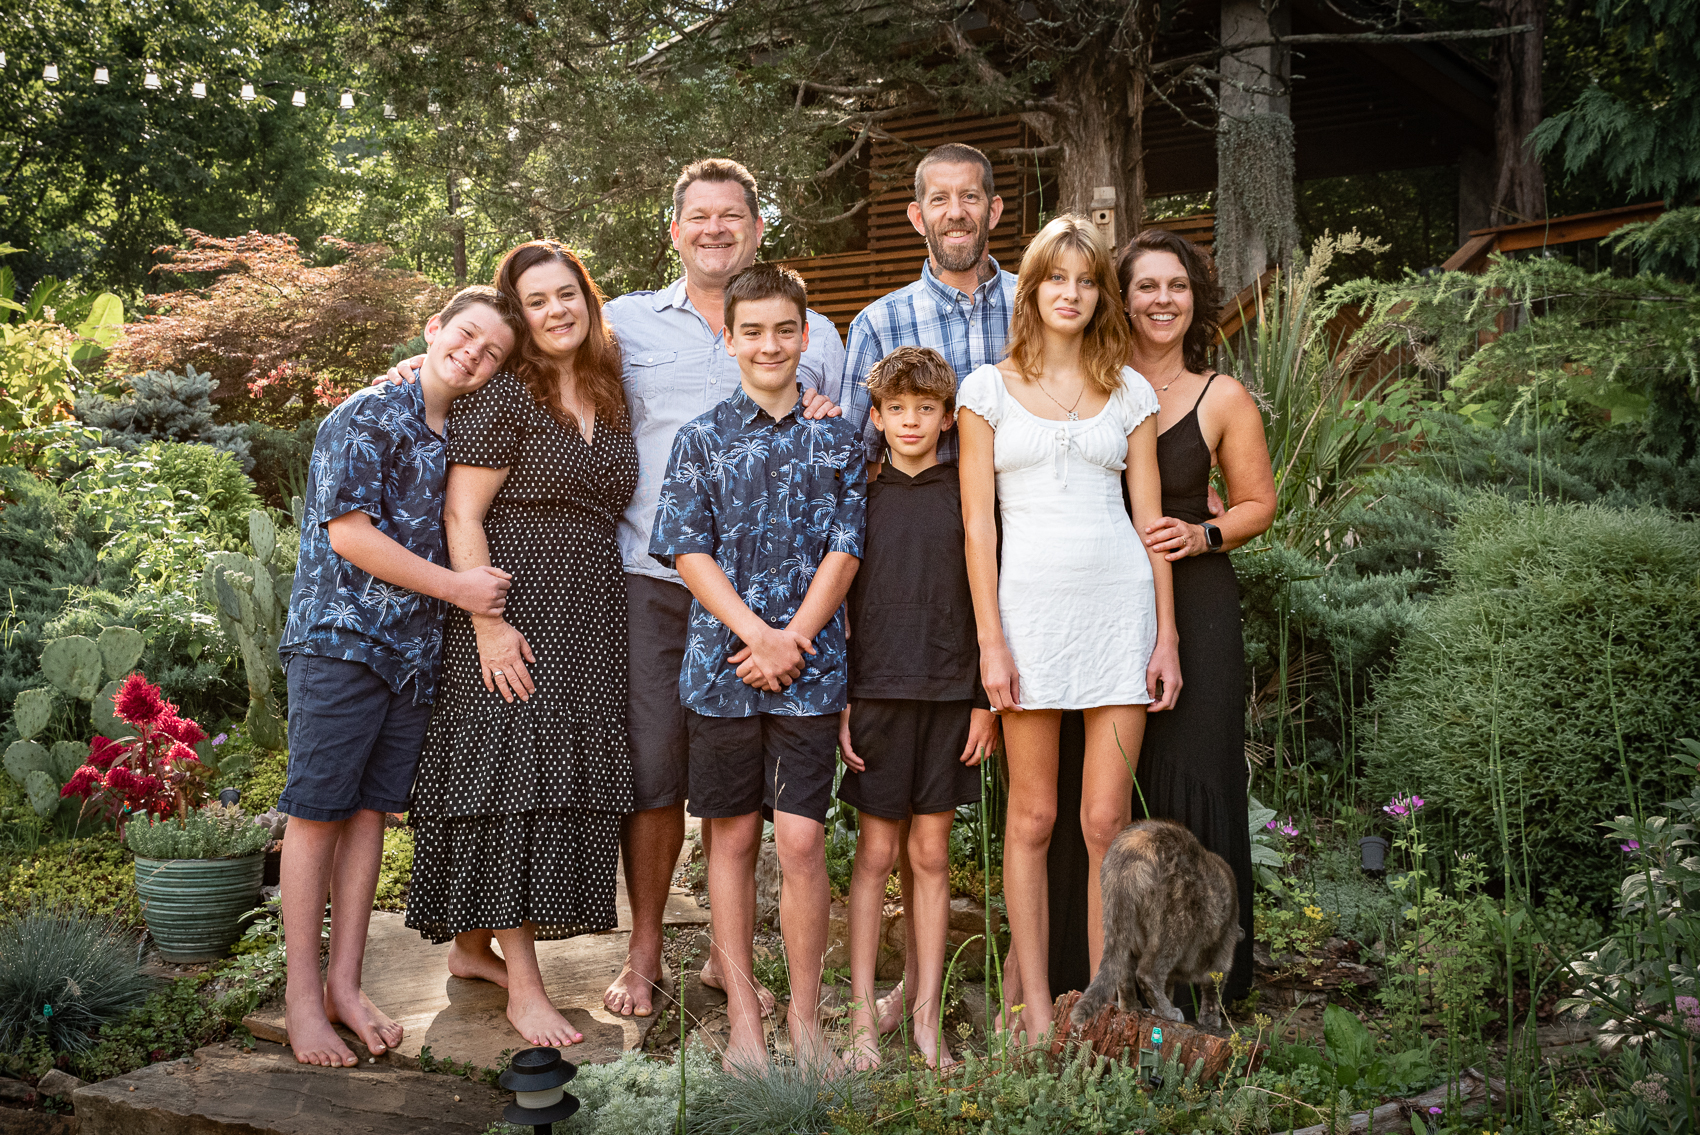 A brother, sister, and their families stand together in the lush, green back yard.